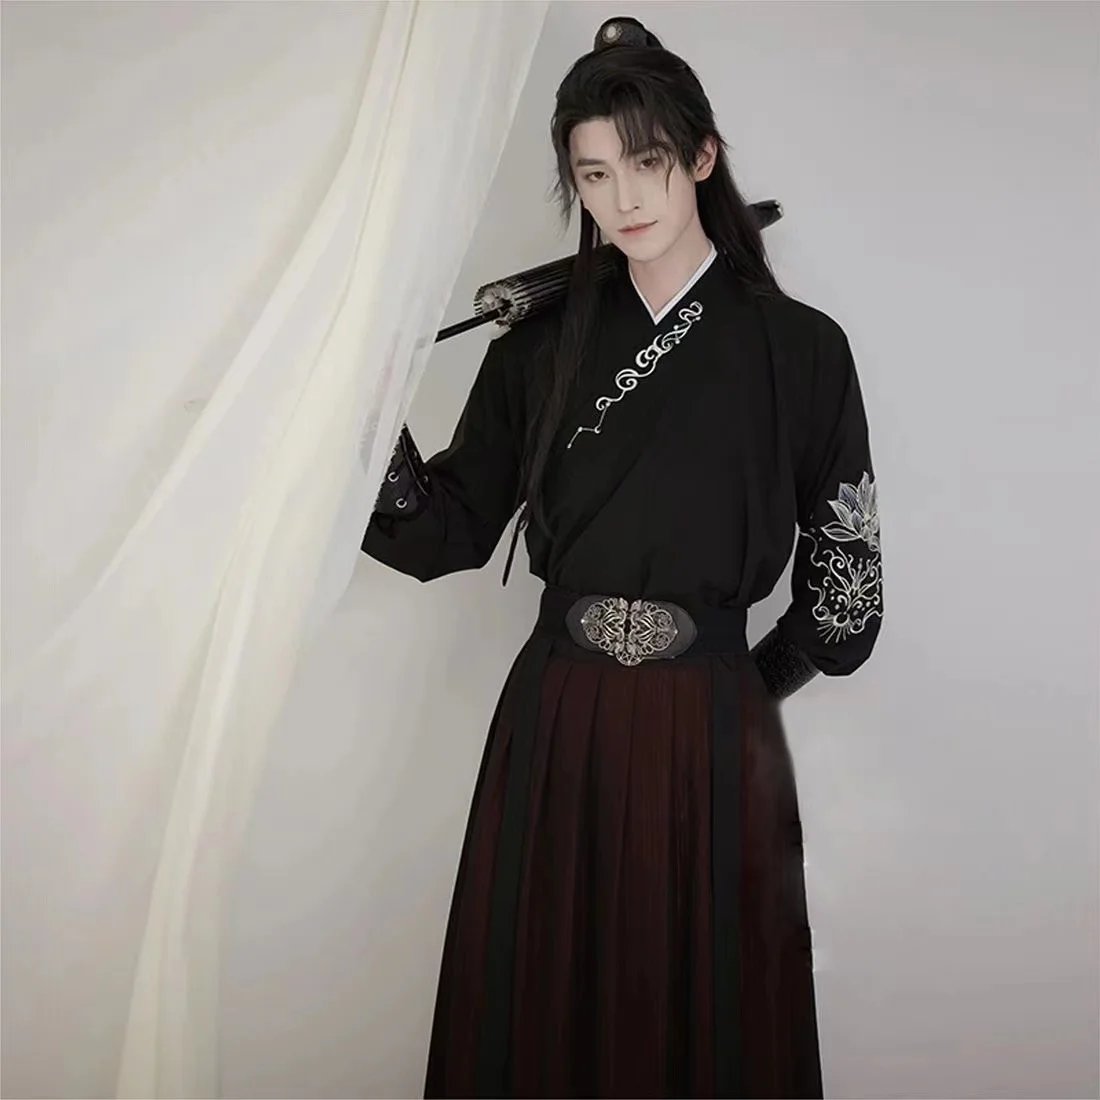 Chinese Style Hanfu Men Ancient Black Costume Hanfu Dress for Boys Girls Young Men Women Photography Cosplay Party Show Clothing sexy short lace tops for maternity photography props full sleeve black photo shooting shirts for pregnant women pregnancy blouse